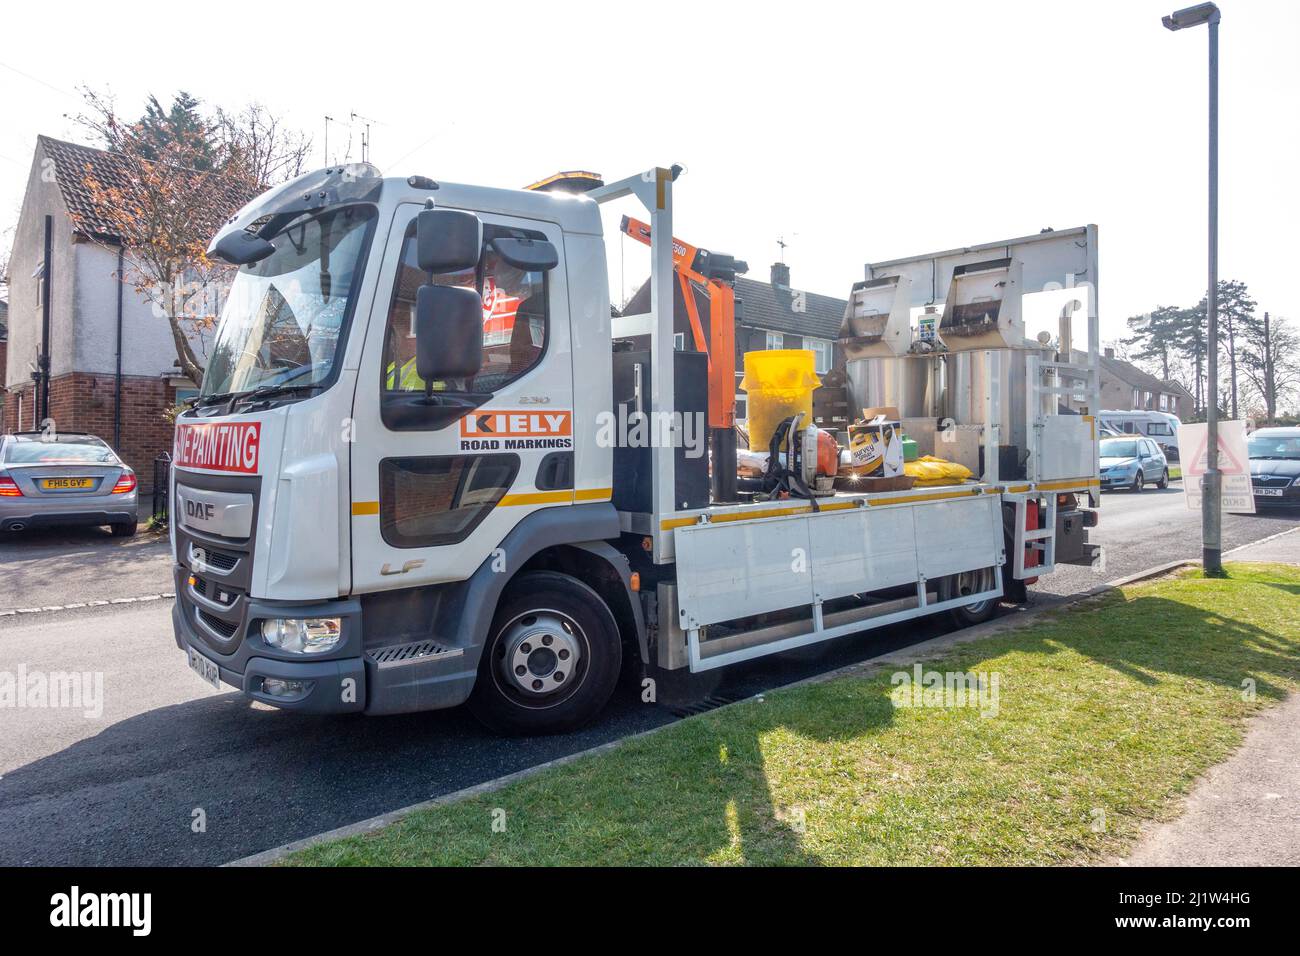 A line painting truck parked at the side of a road to repaint lines on a newly resurfaced road. Stock Photo